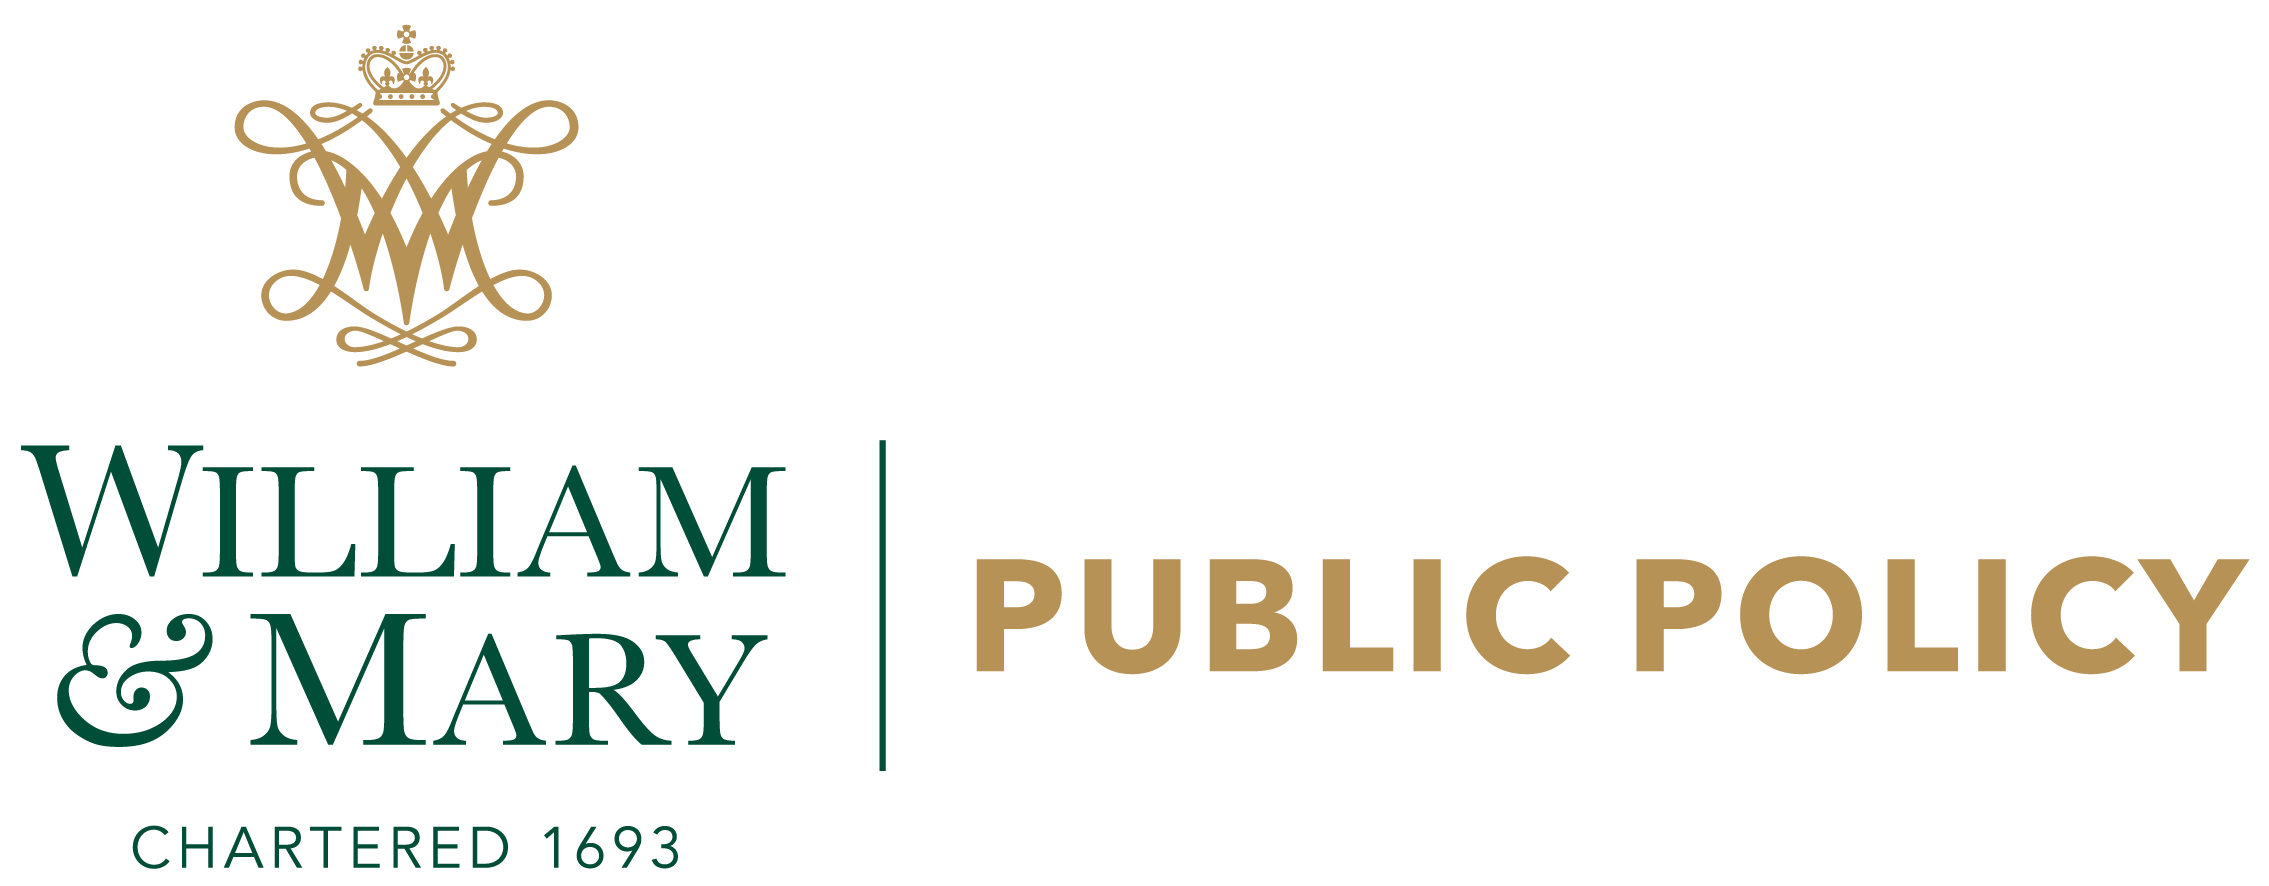 public-policy-logo.png